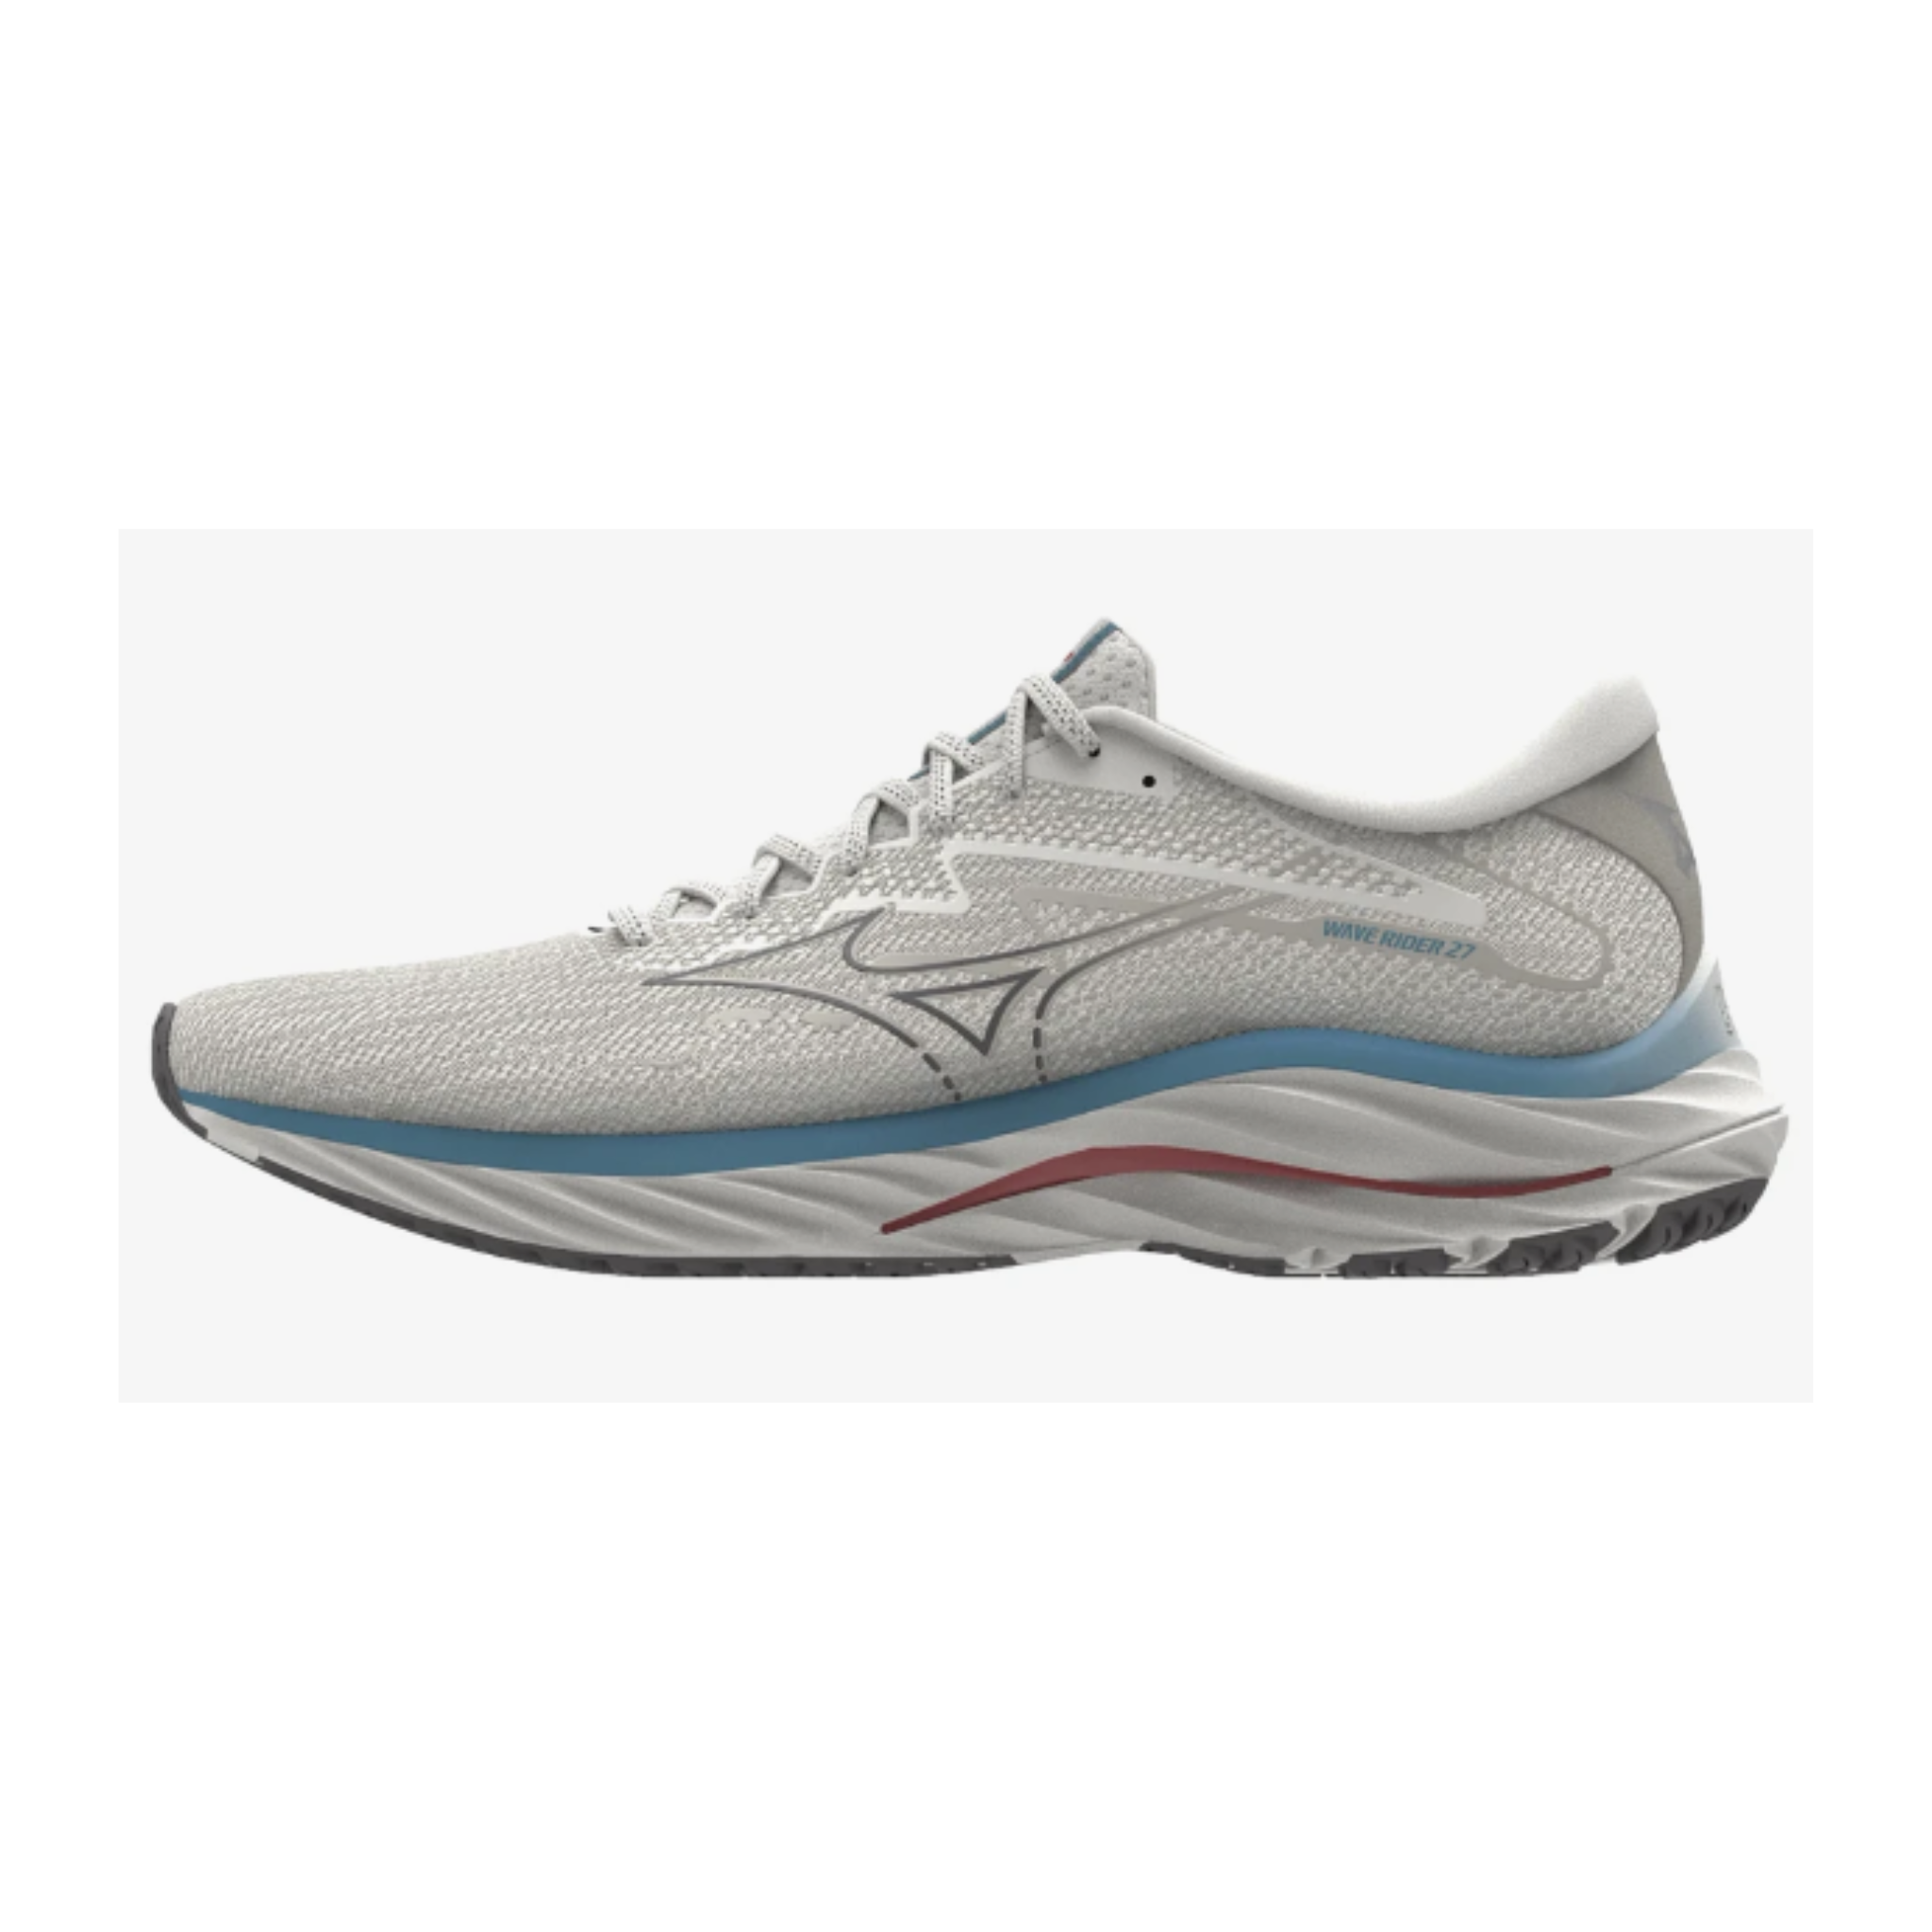 WAVE RIDER 27 - Grey, Running shoes & trainers